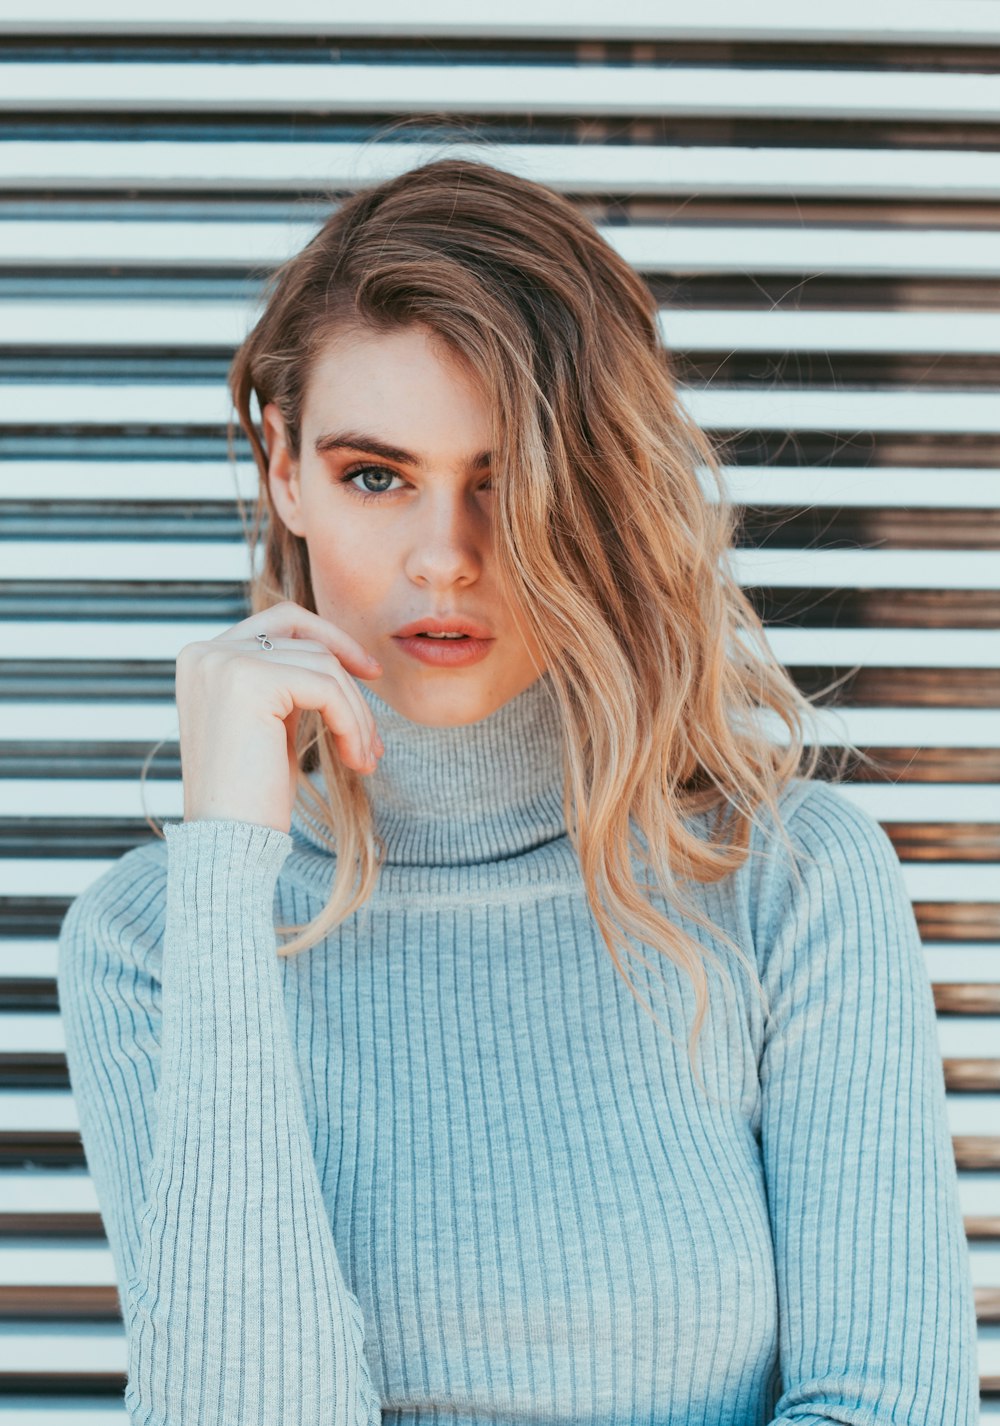 woman wearing gray turtle-neck top standing near white wall